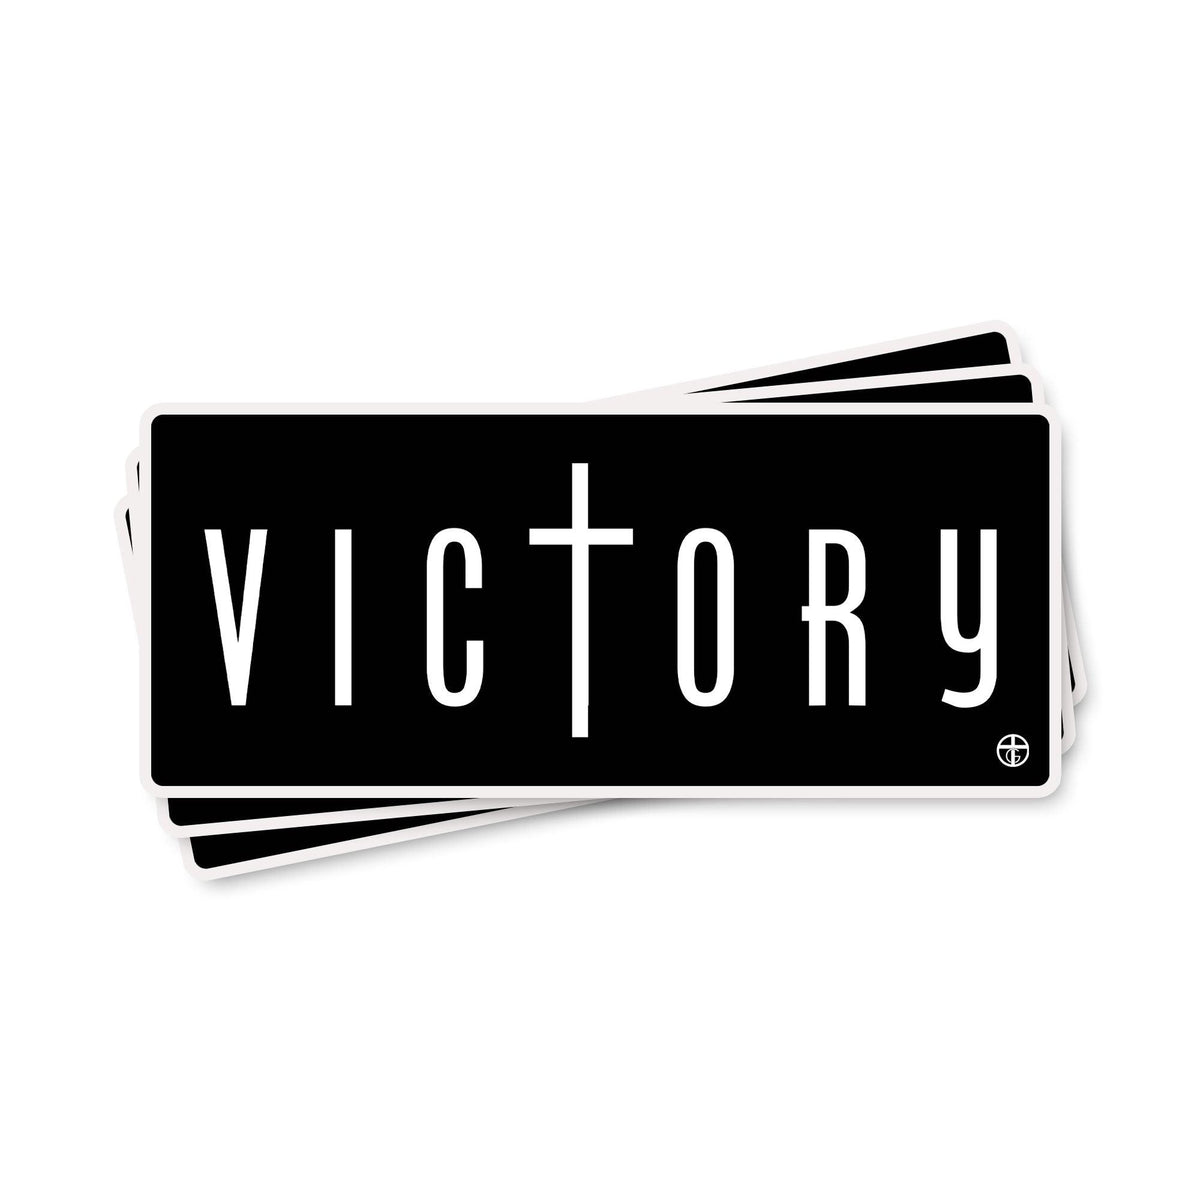 Victory Decals - Our True God